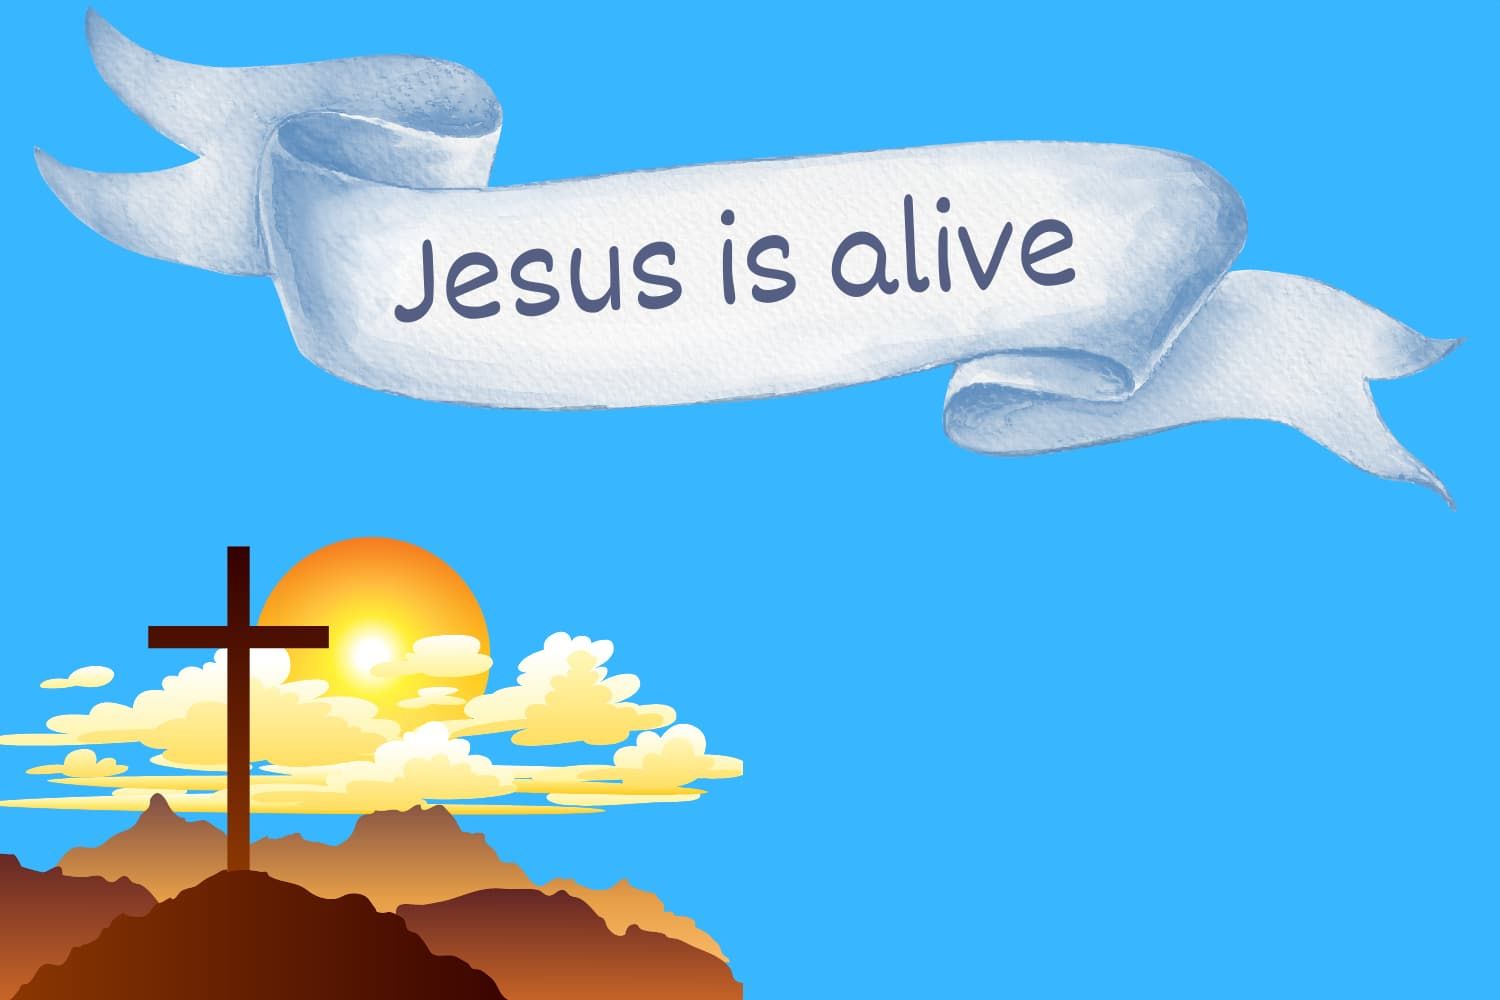 Craft%20-%20Easter%2010%20He%20is%20risen%20-%20Jesus%20is%20alive%20banners-887b4c57 Life / alive